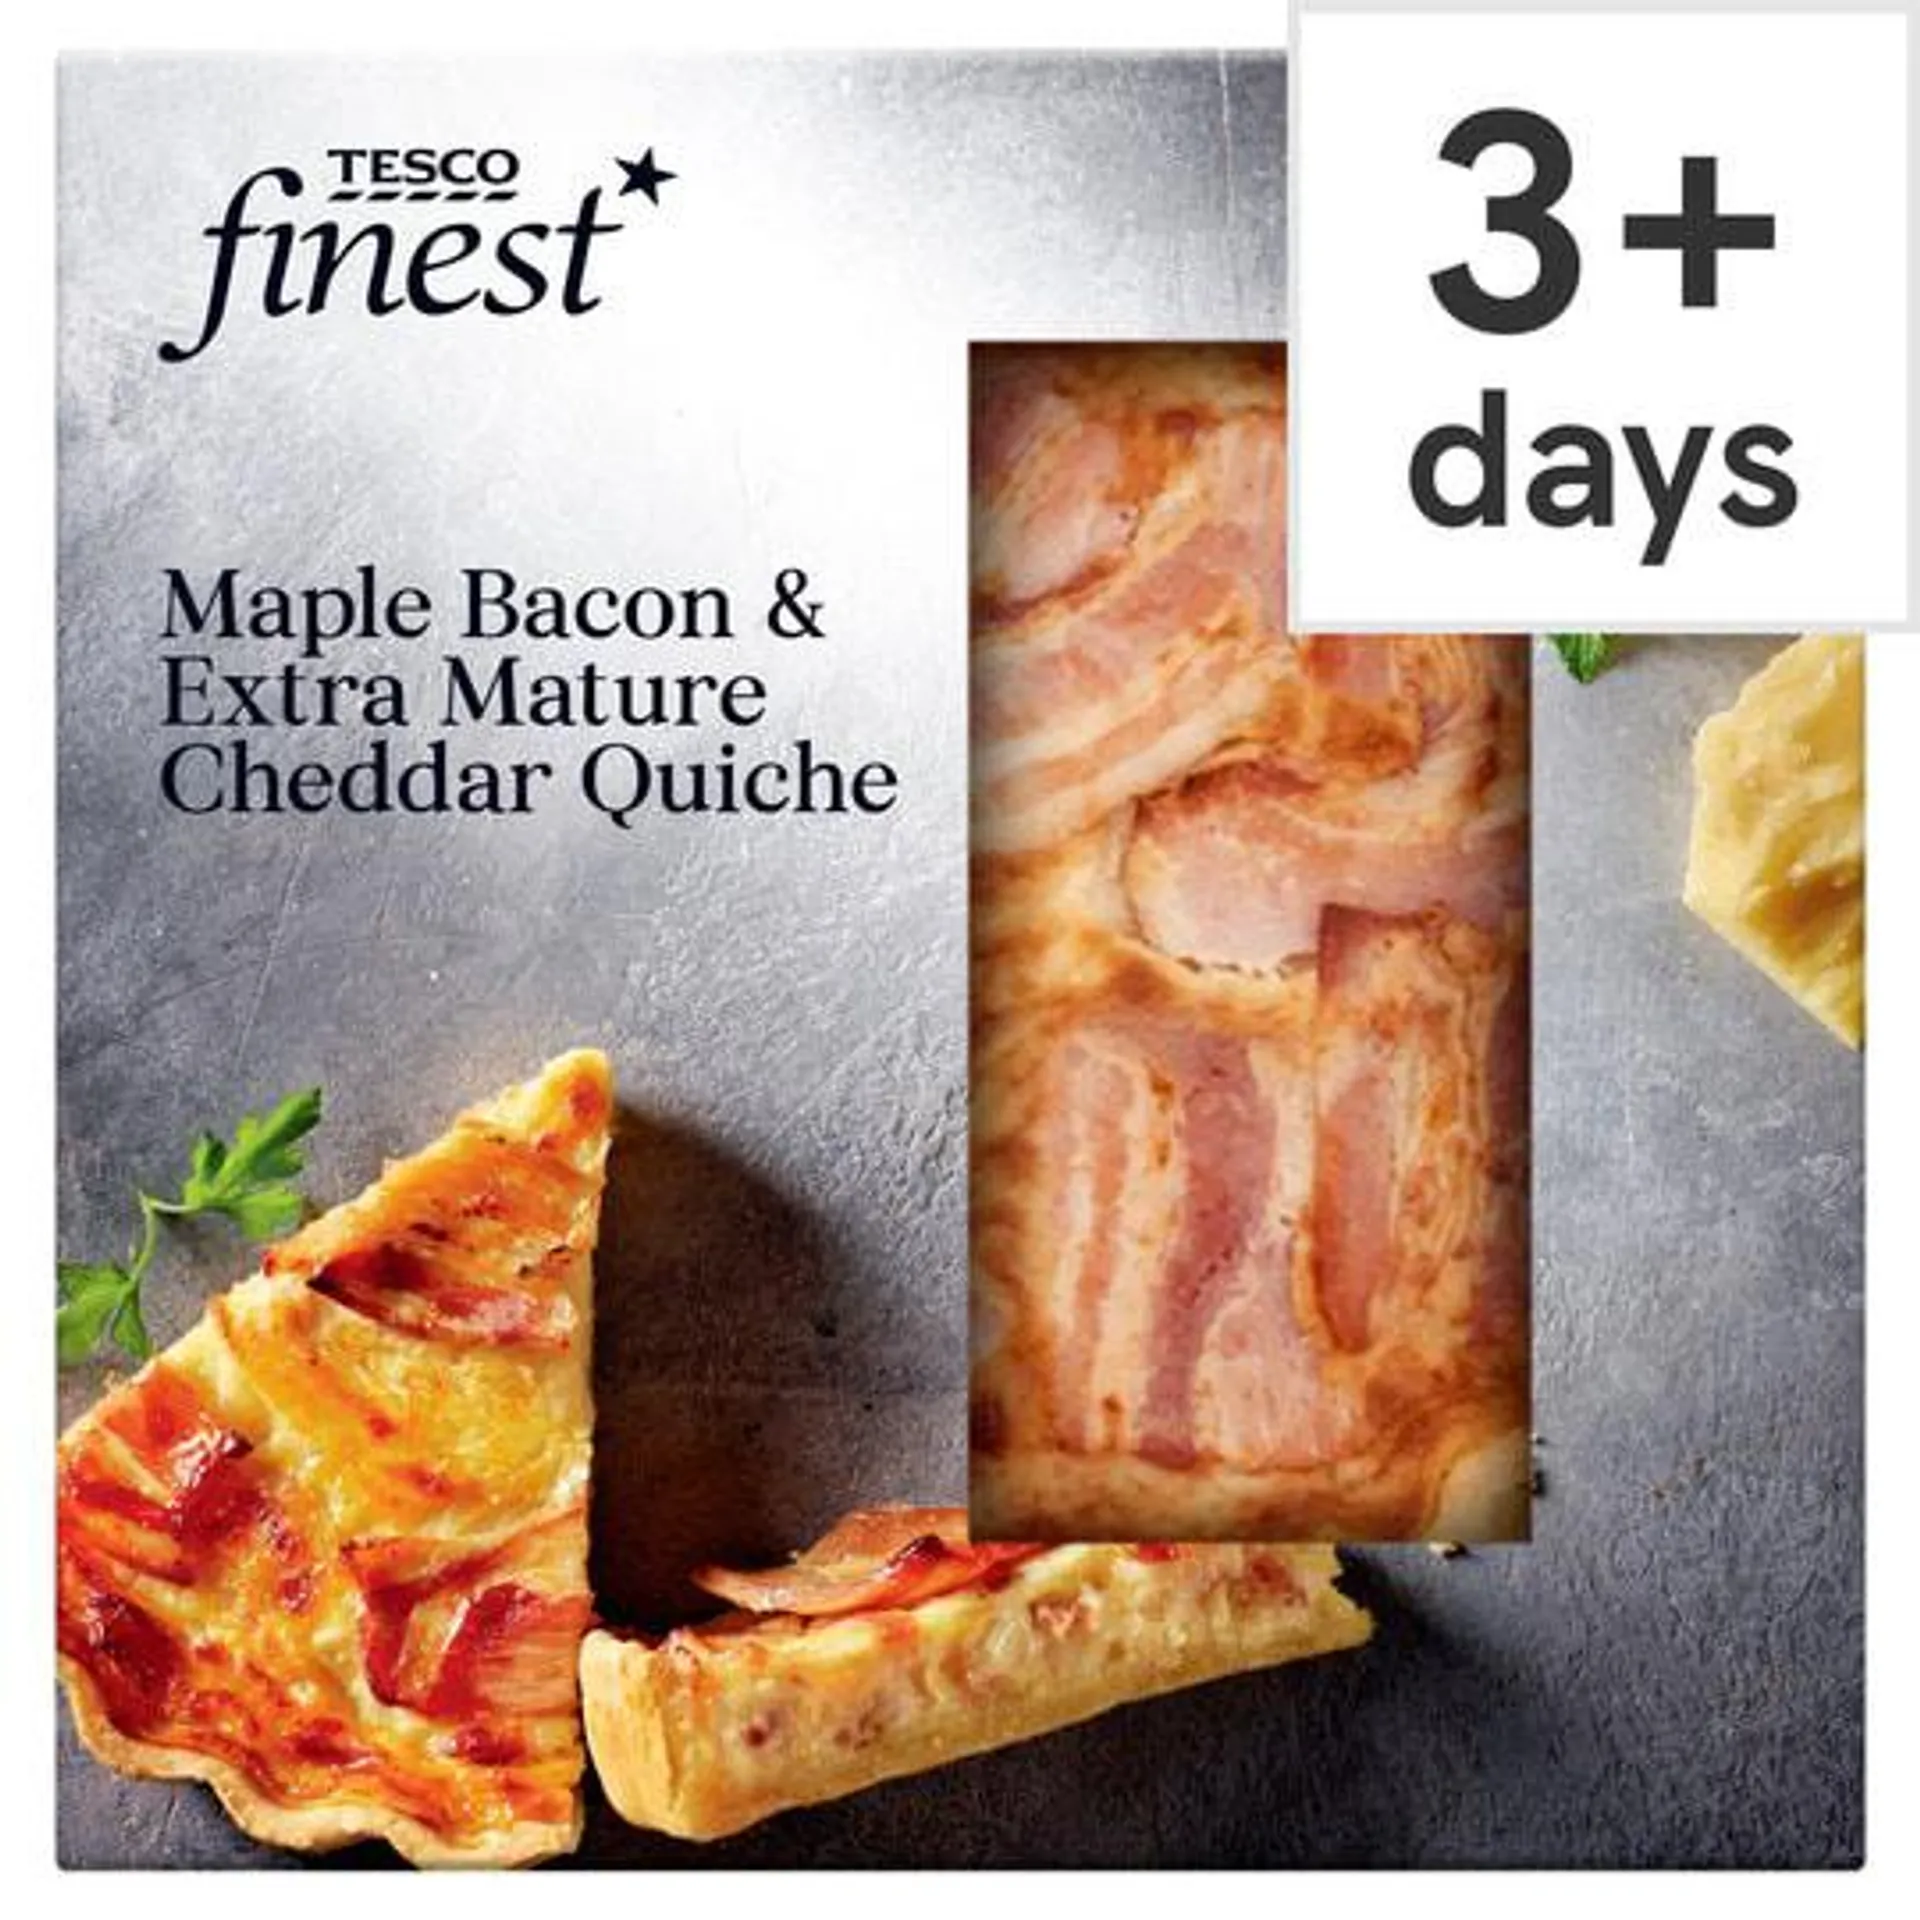 Tesco Finest Maple Bacon & Extra Mature Cheddar Quiche 420G